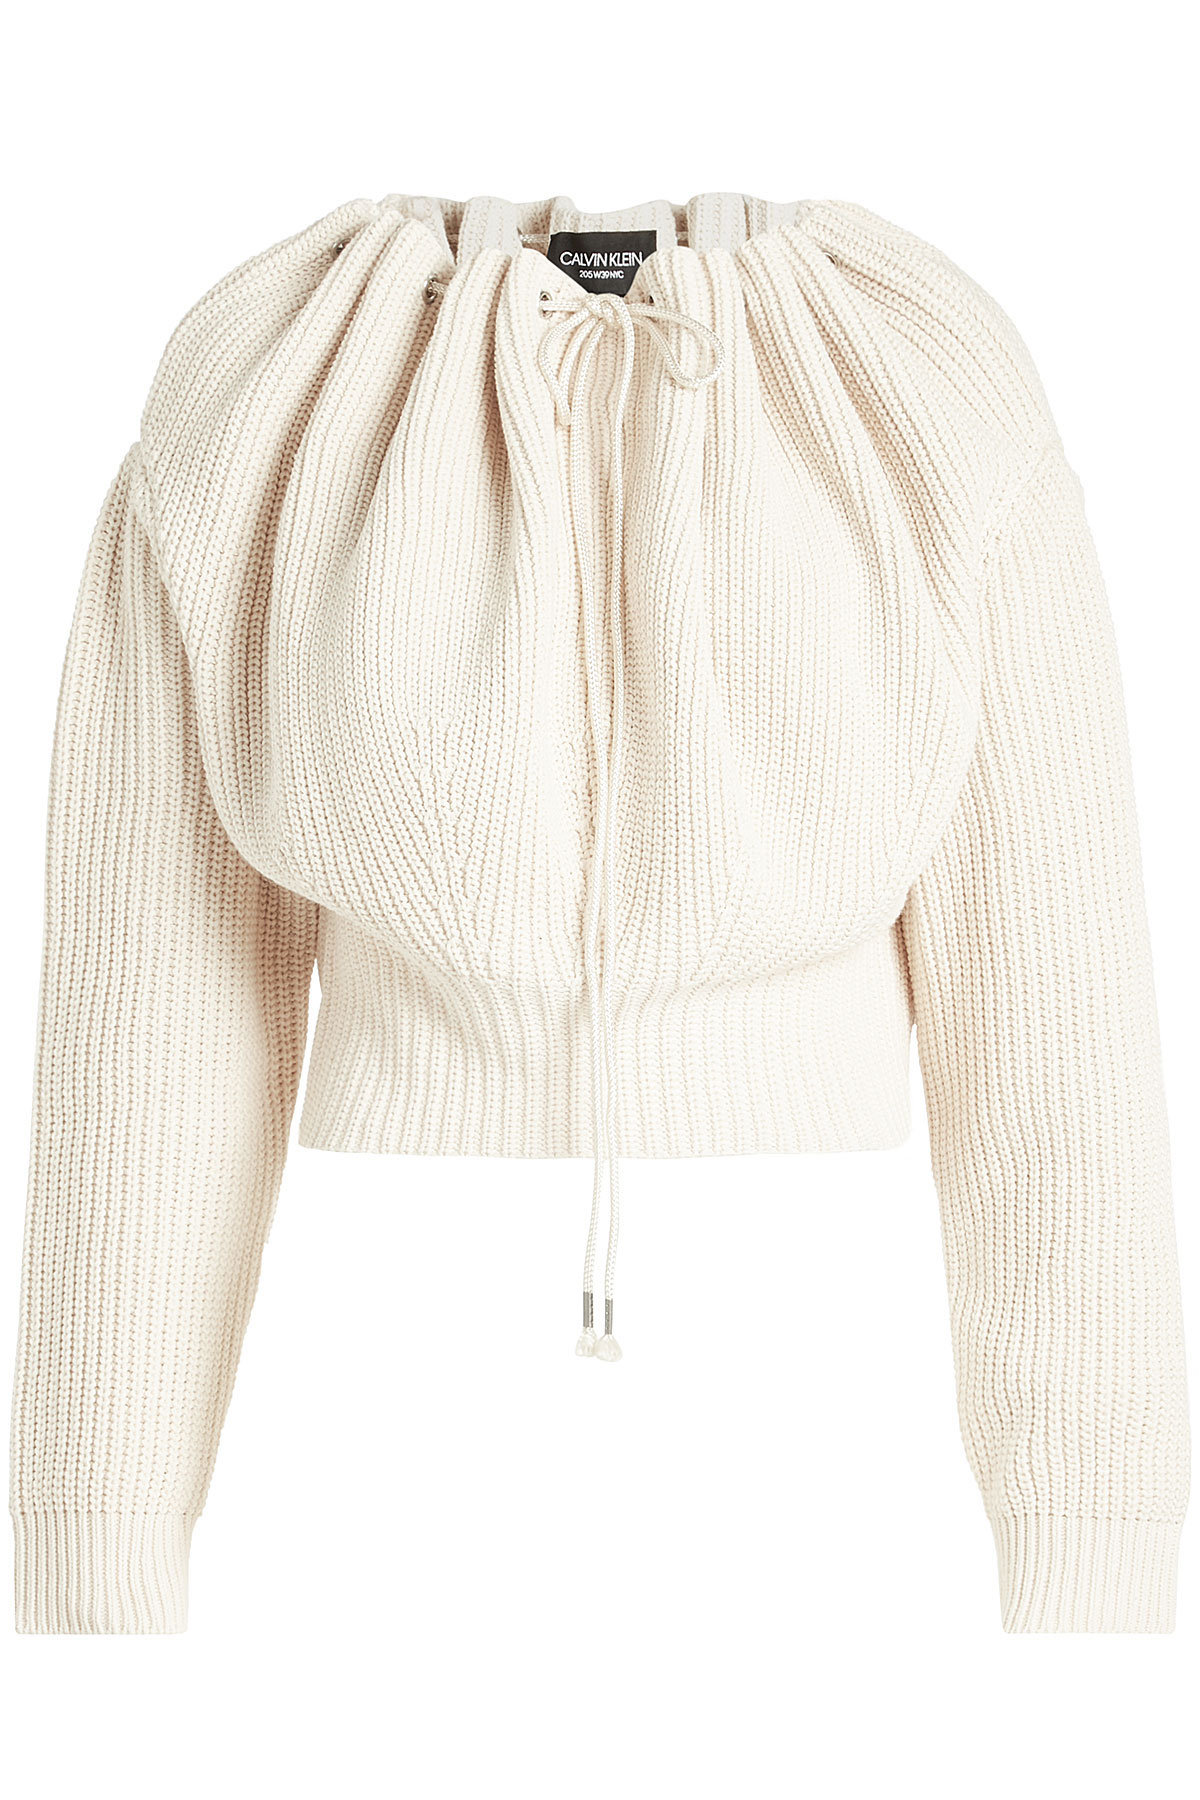 Off-Shoulder Knit Pullover by CALVIN KLEIN 205W39NYC